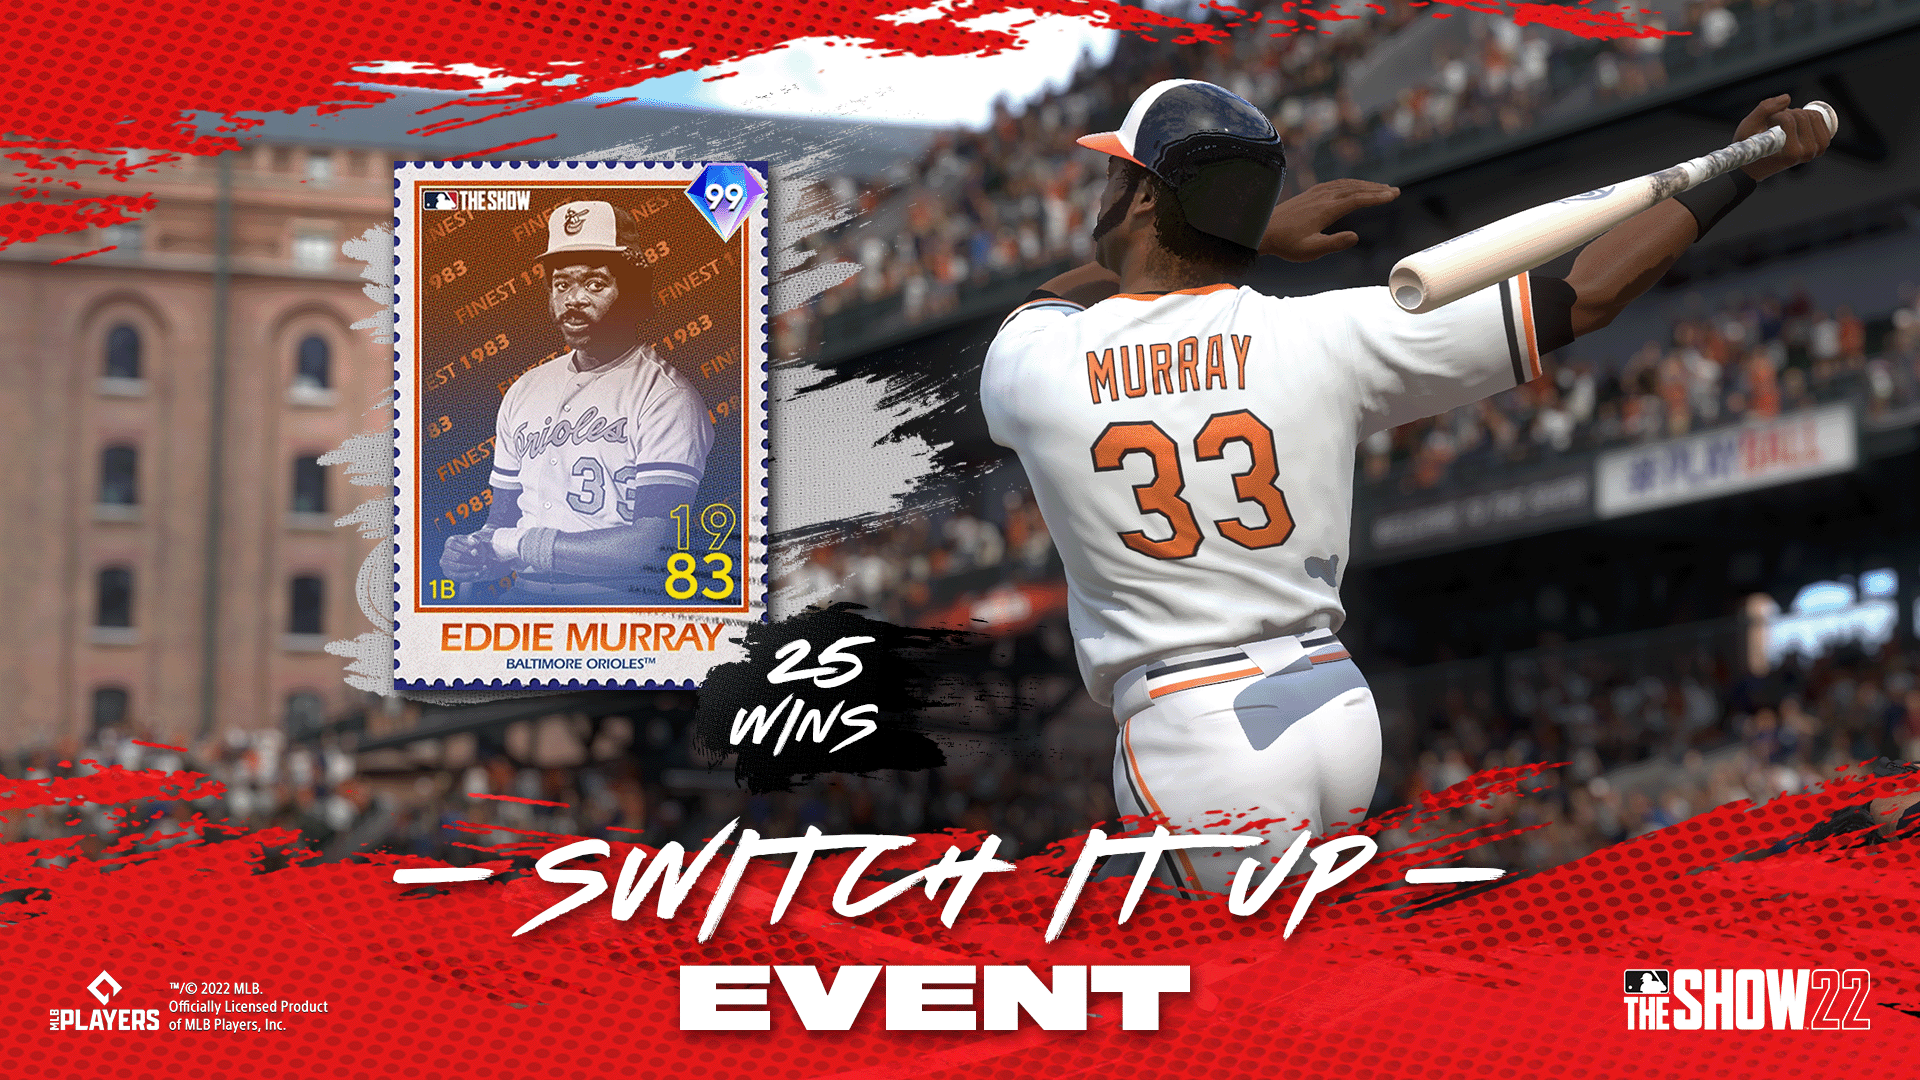 MLB The Show on X: 2️⃣5️⃣ wins in the Switch It Up Event will